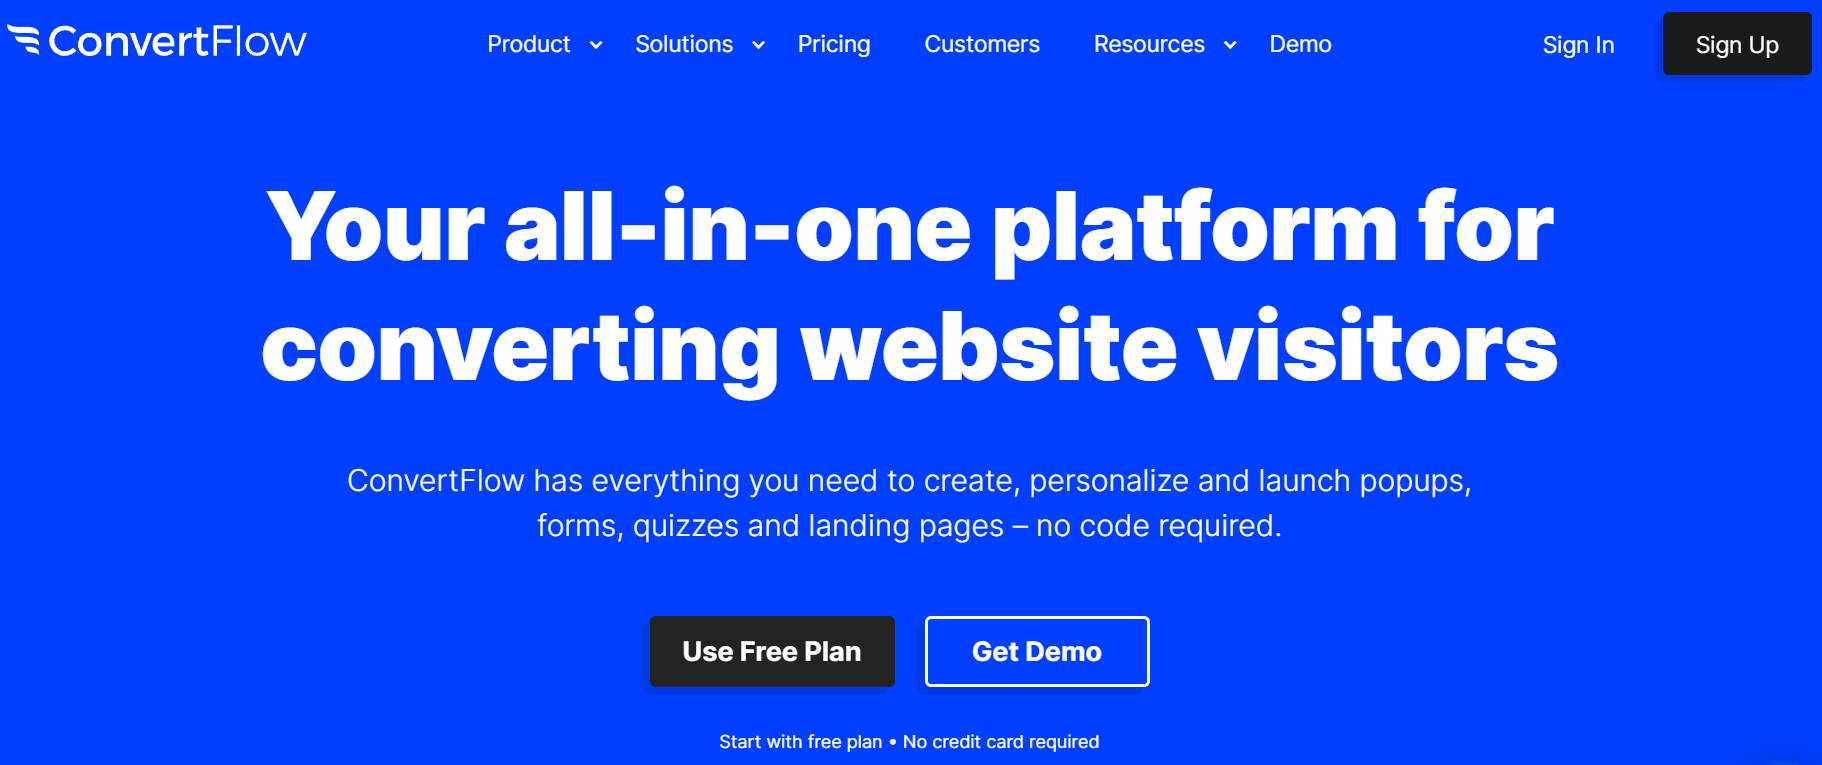 ConvertFlow is one of the best free landing page builders.